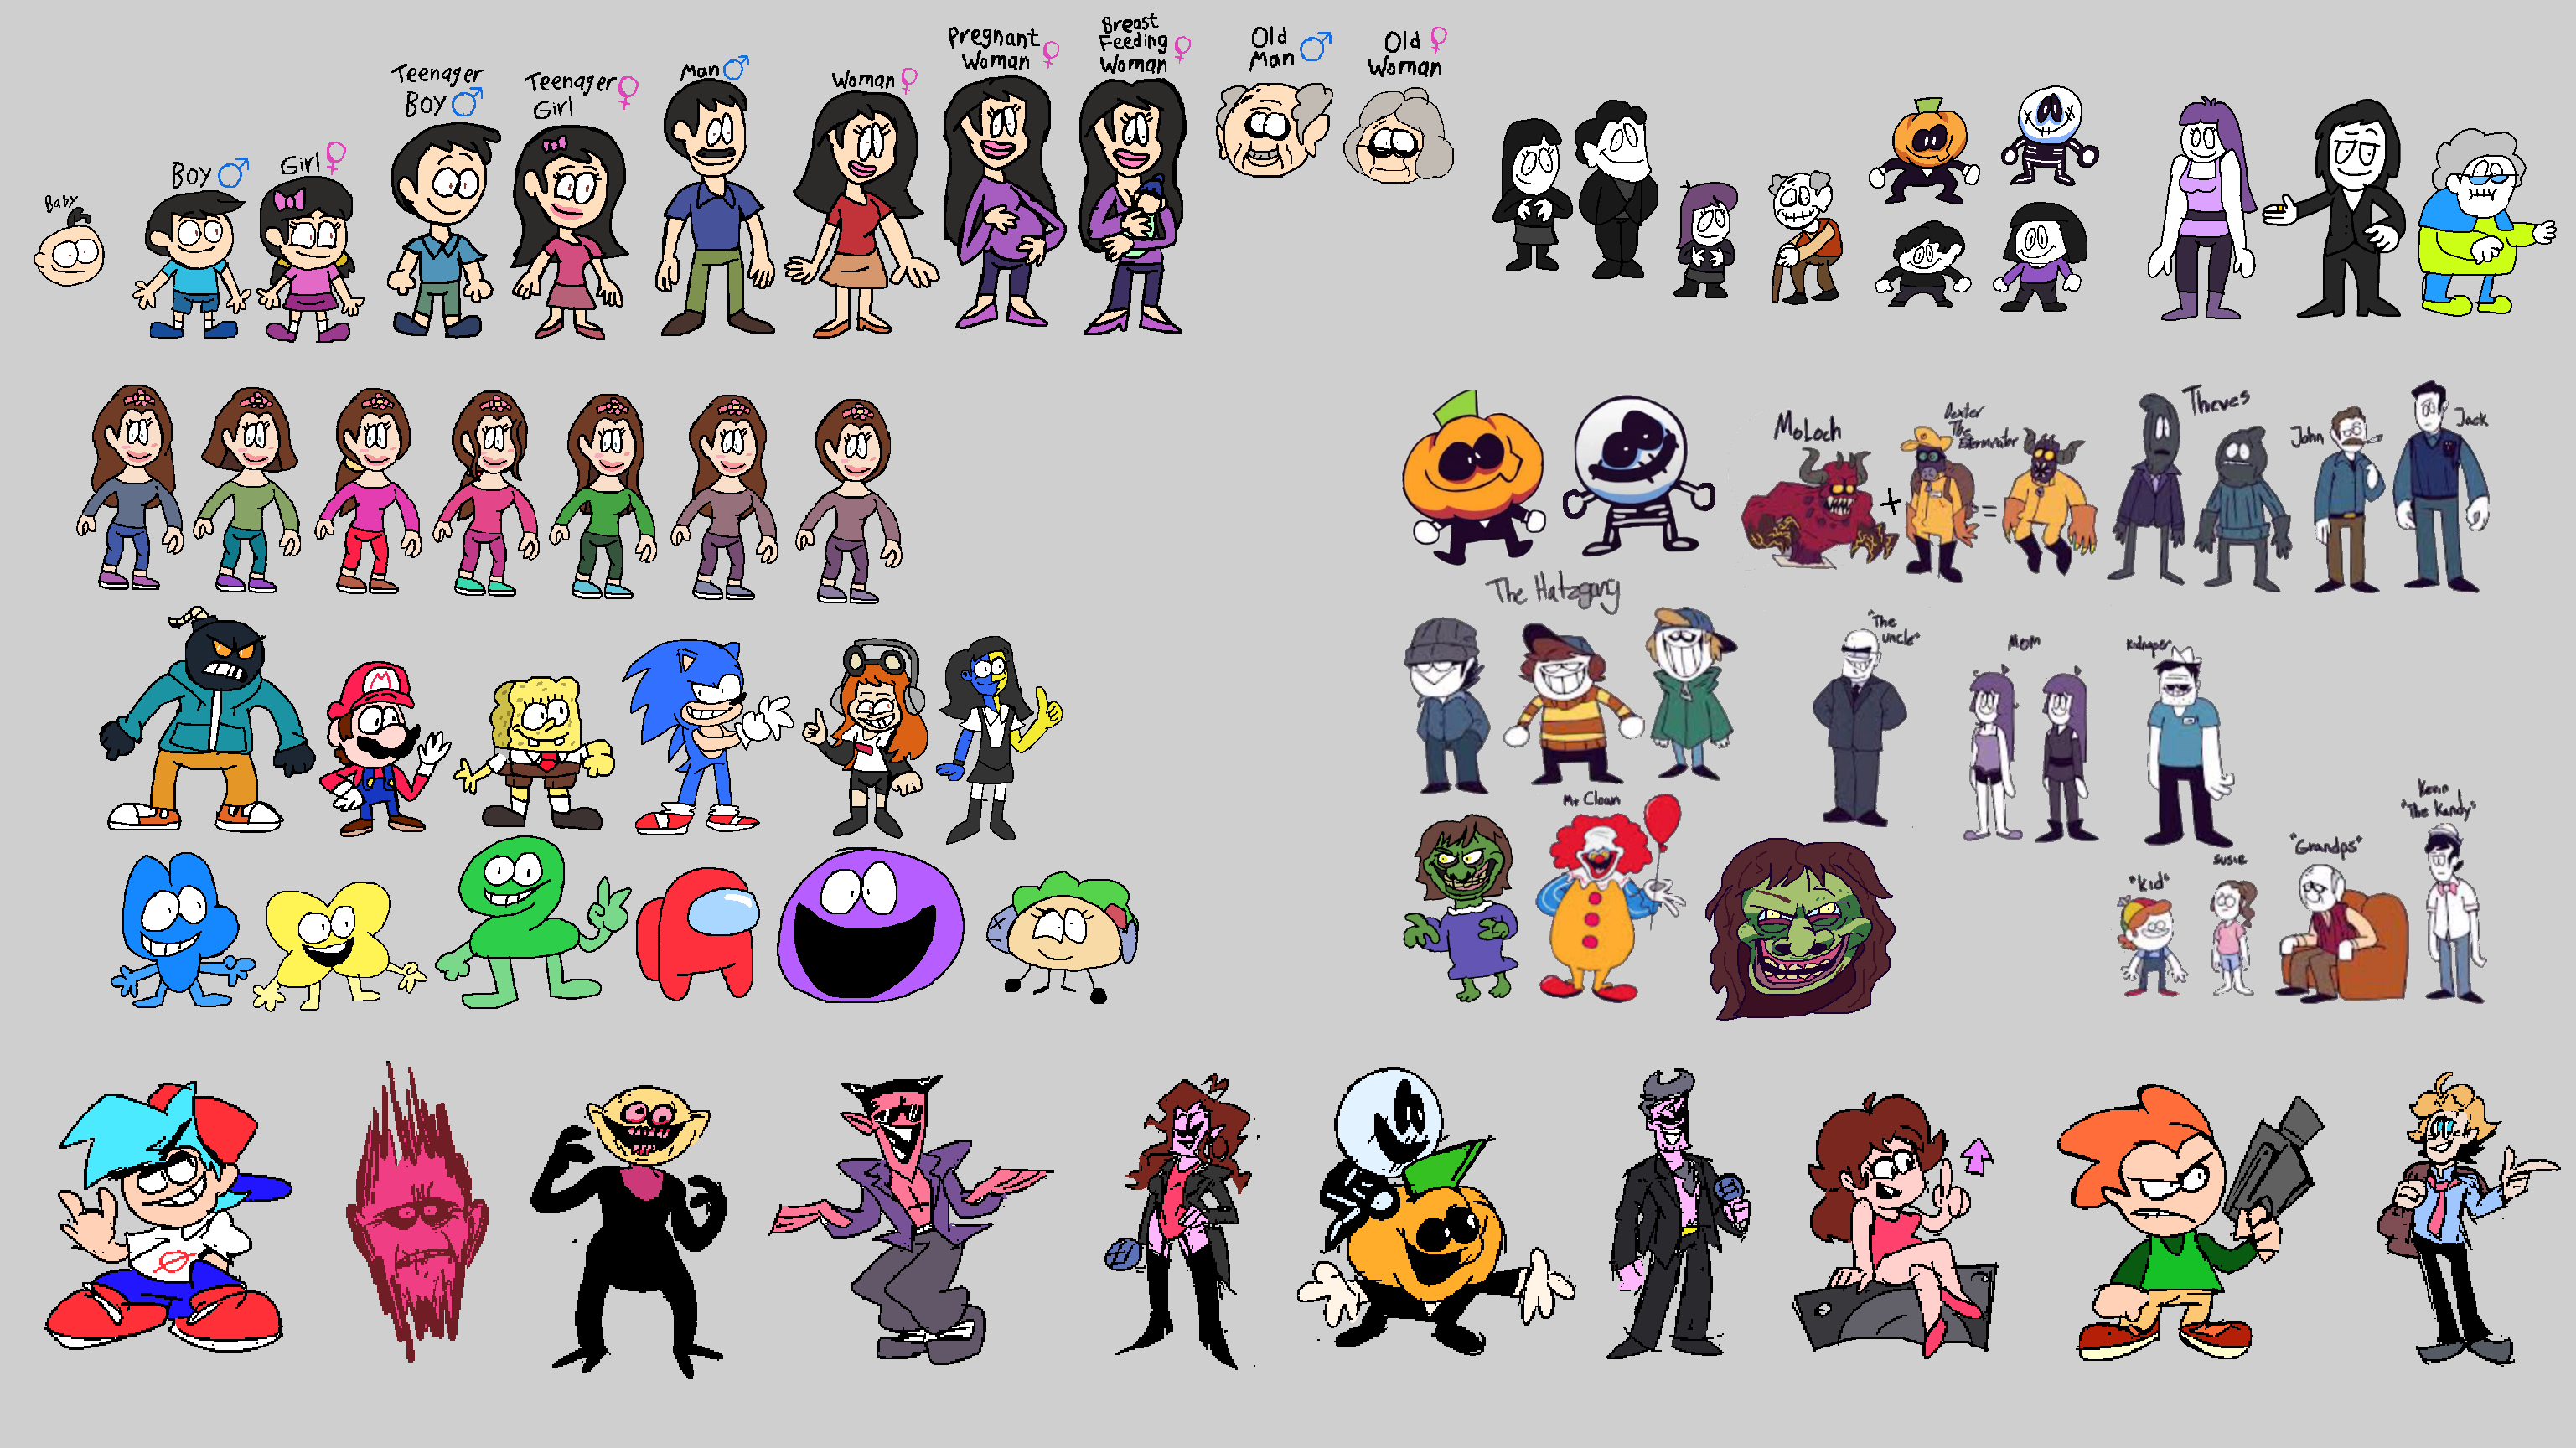 i gave the some of the spooky month characters skin color bc im in